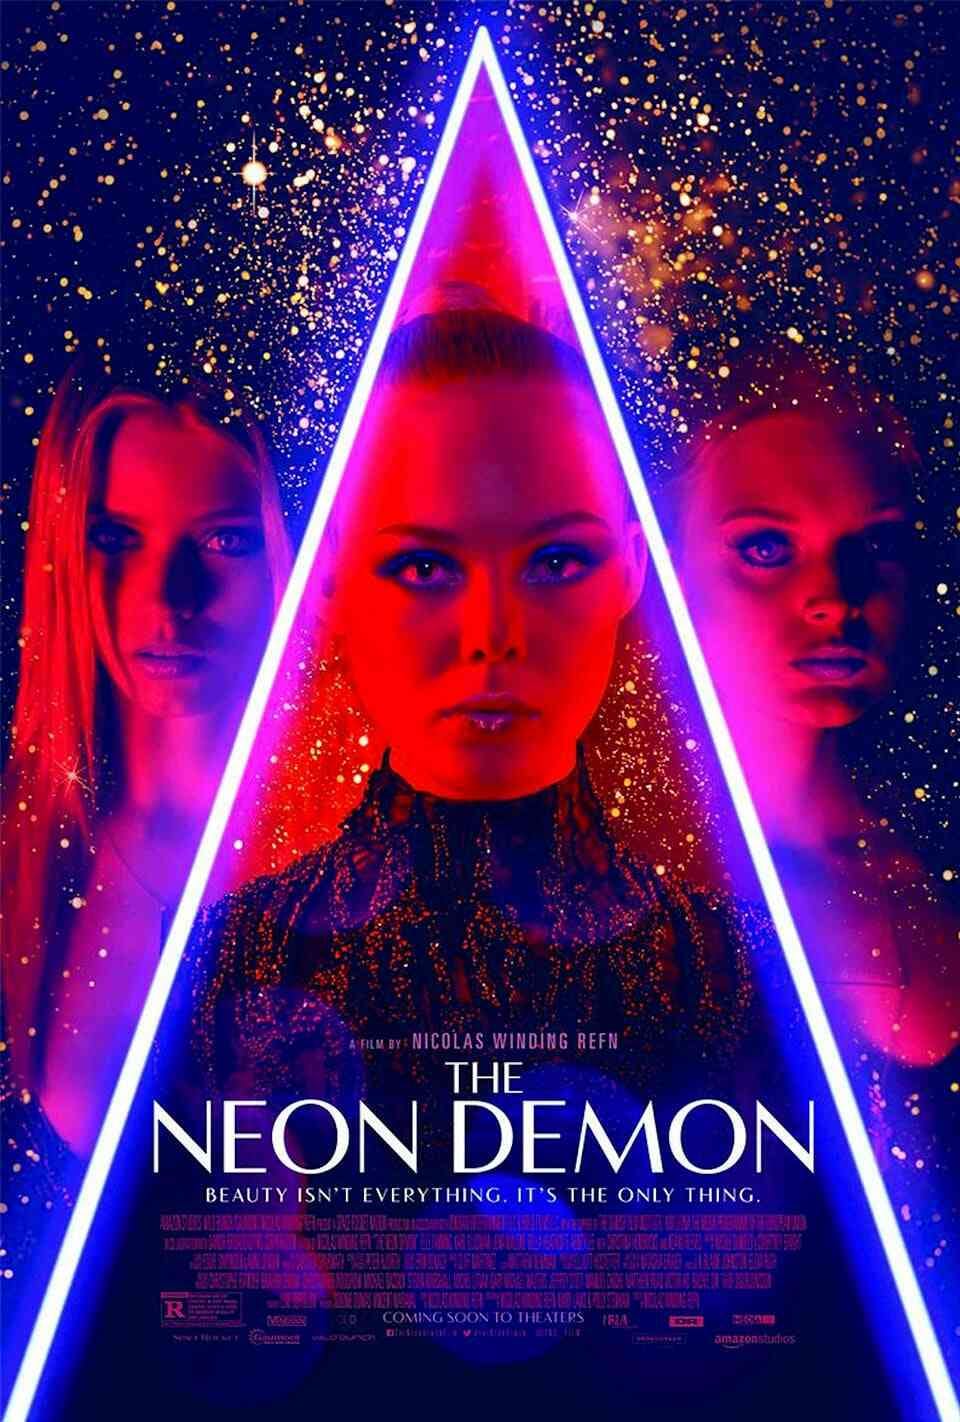 Read The Neon Demon screenplay (poster)